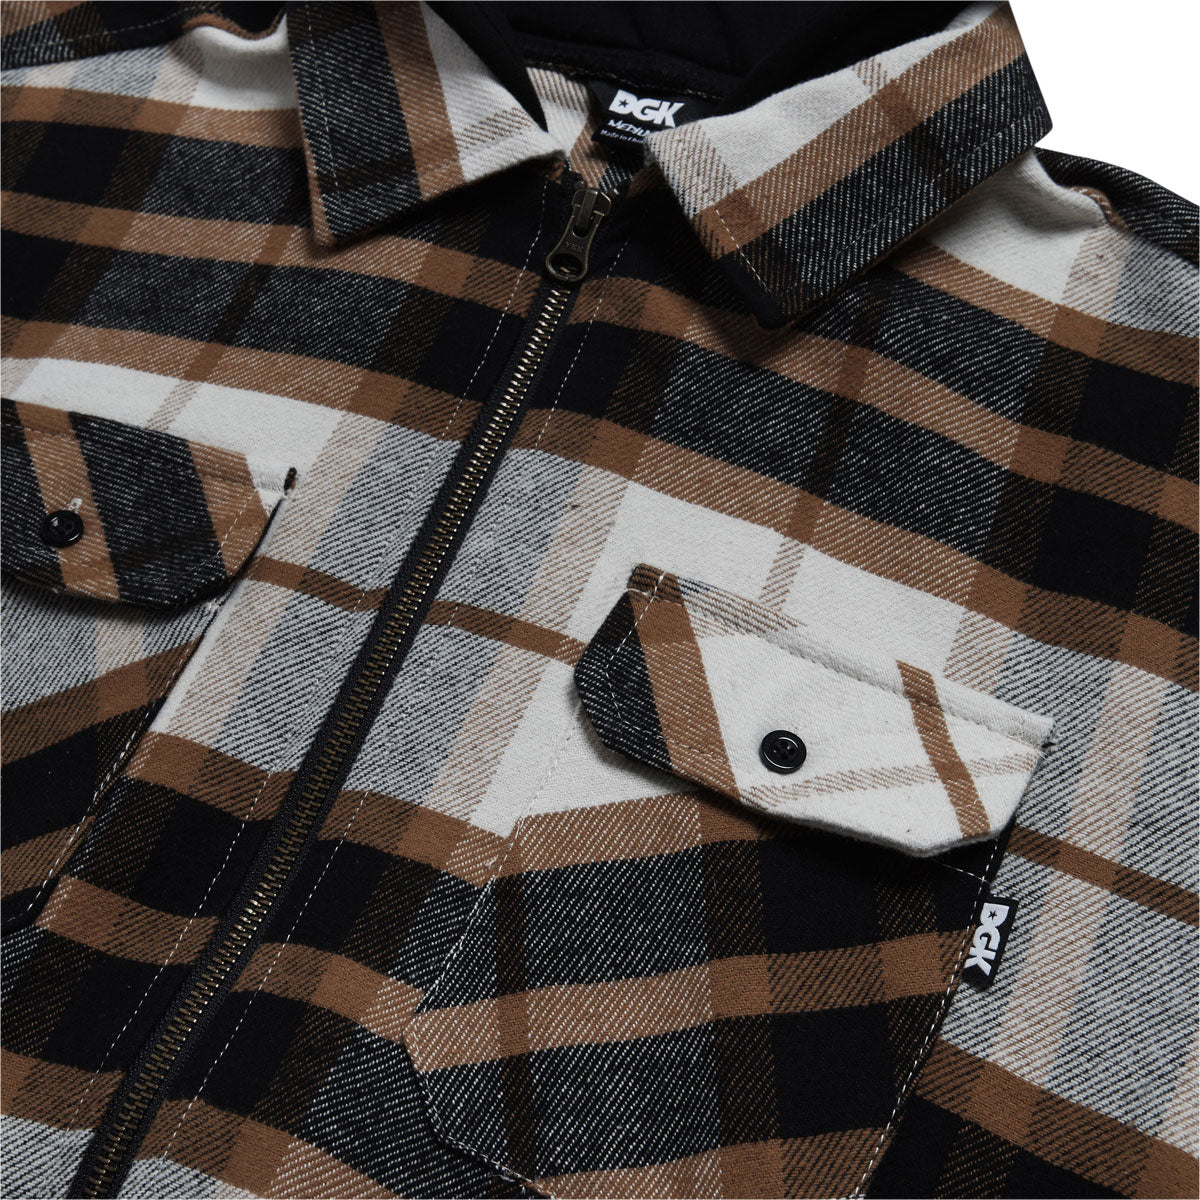 DGK Cry Later Flannel Shacket Jacket - Brown image 4